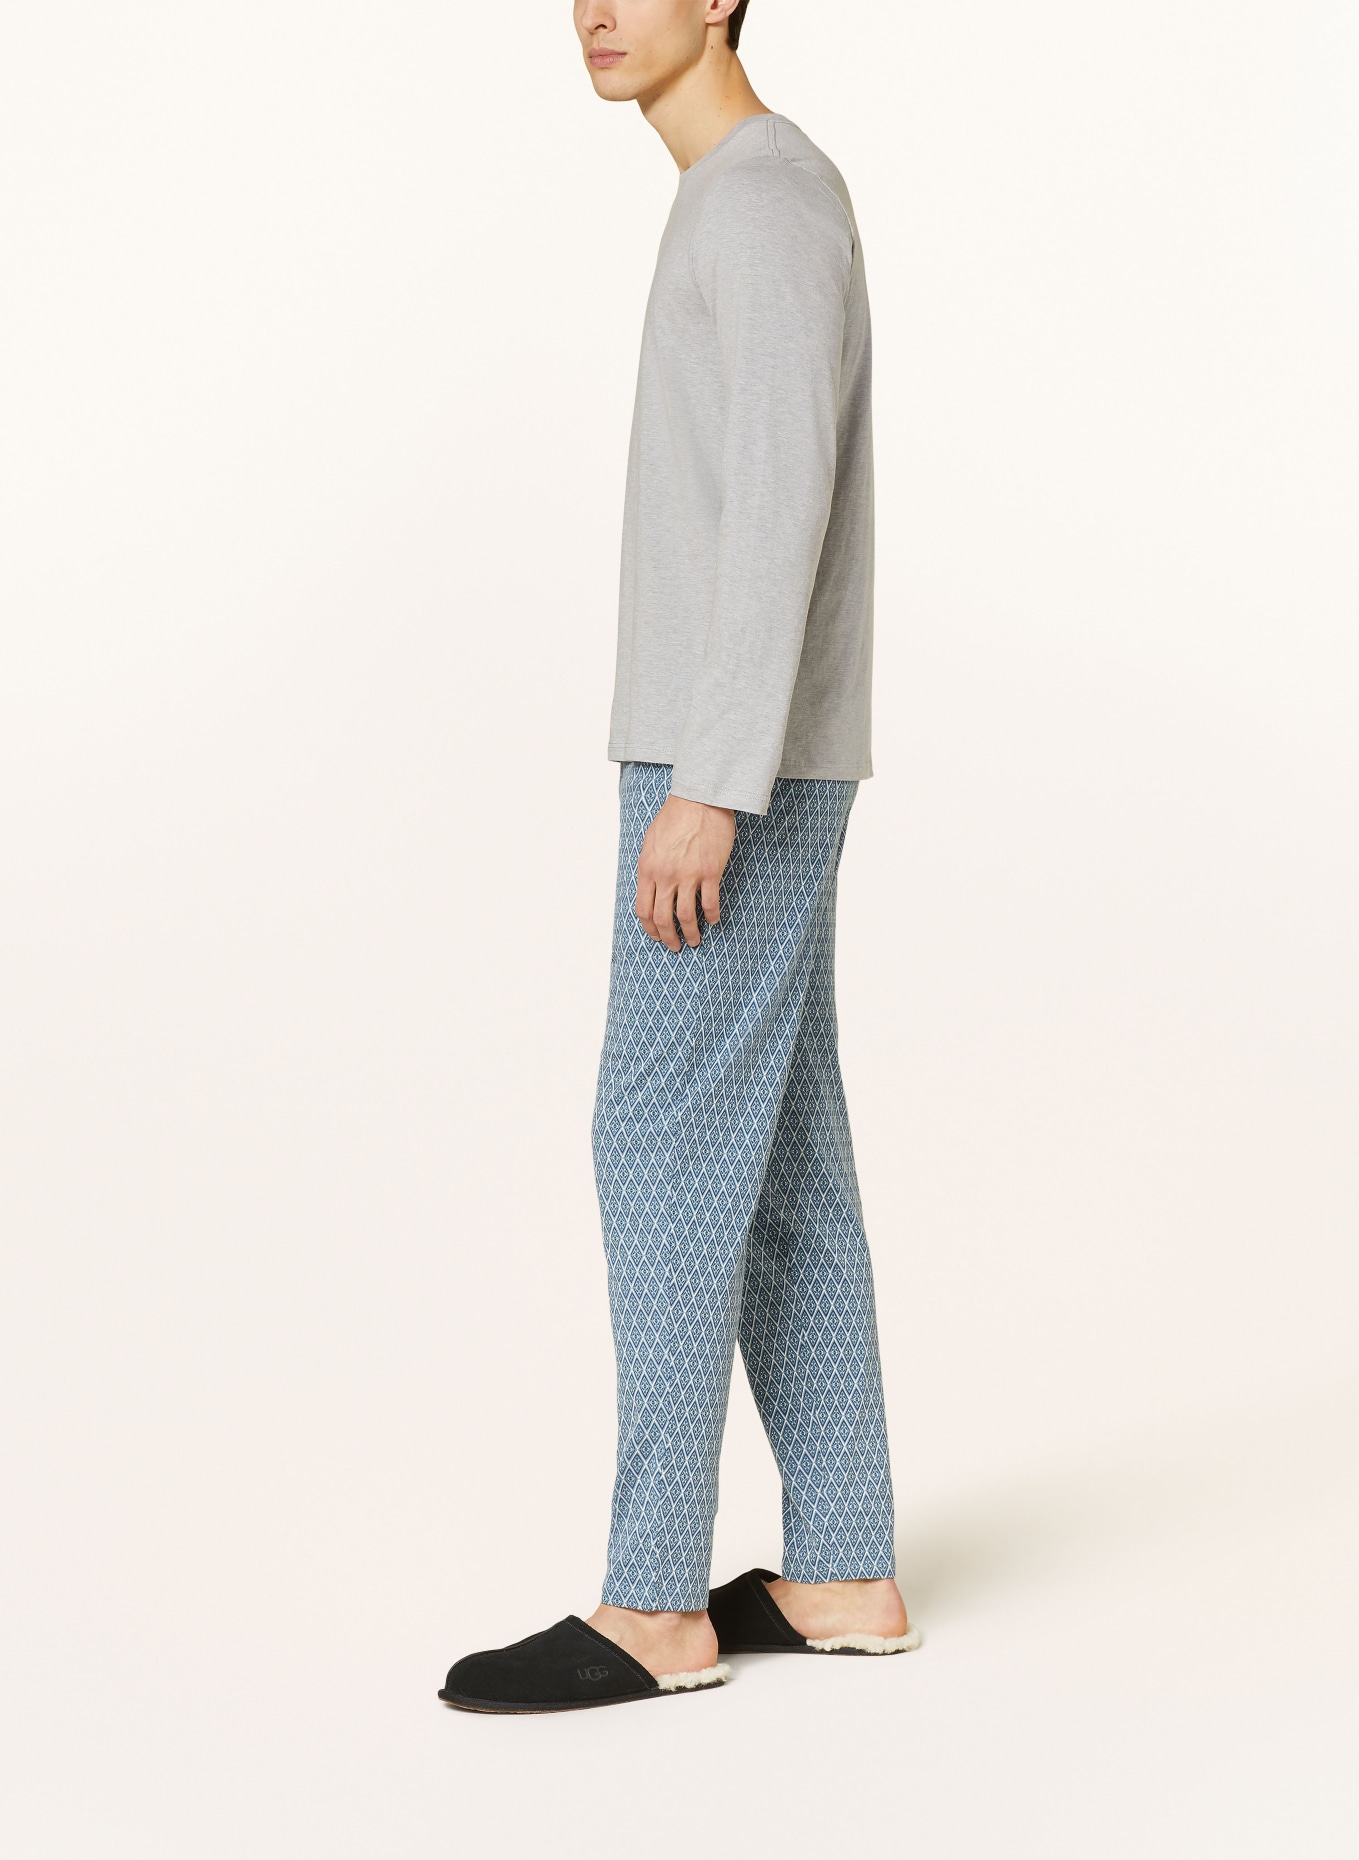 SCHIESSER Pajama pants MIX + RELAX, Color: BLUE GRAY/ BLUE/ WHITE (Image 4)